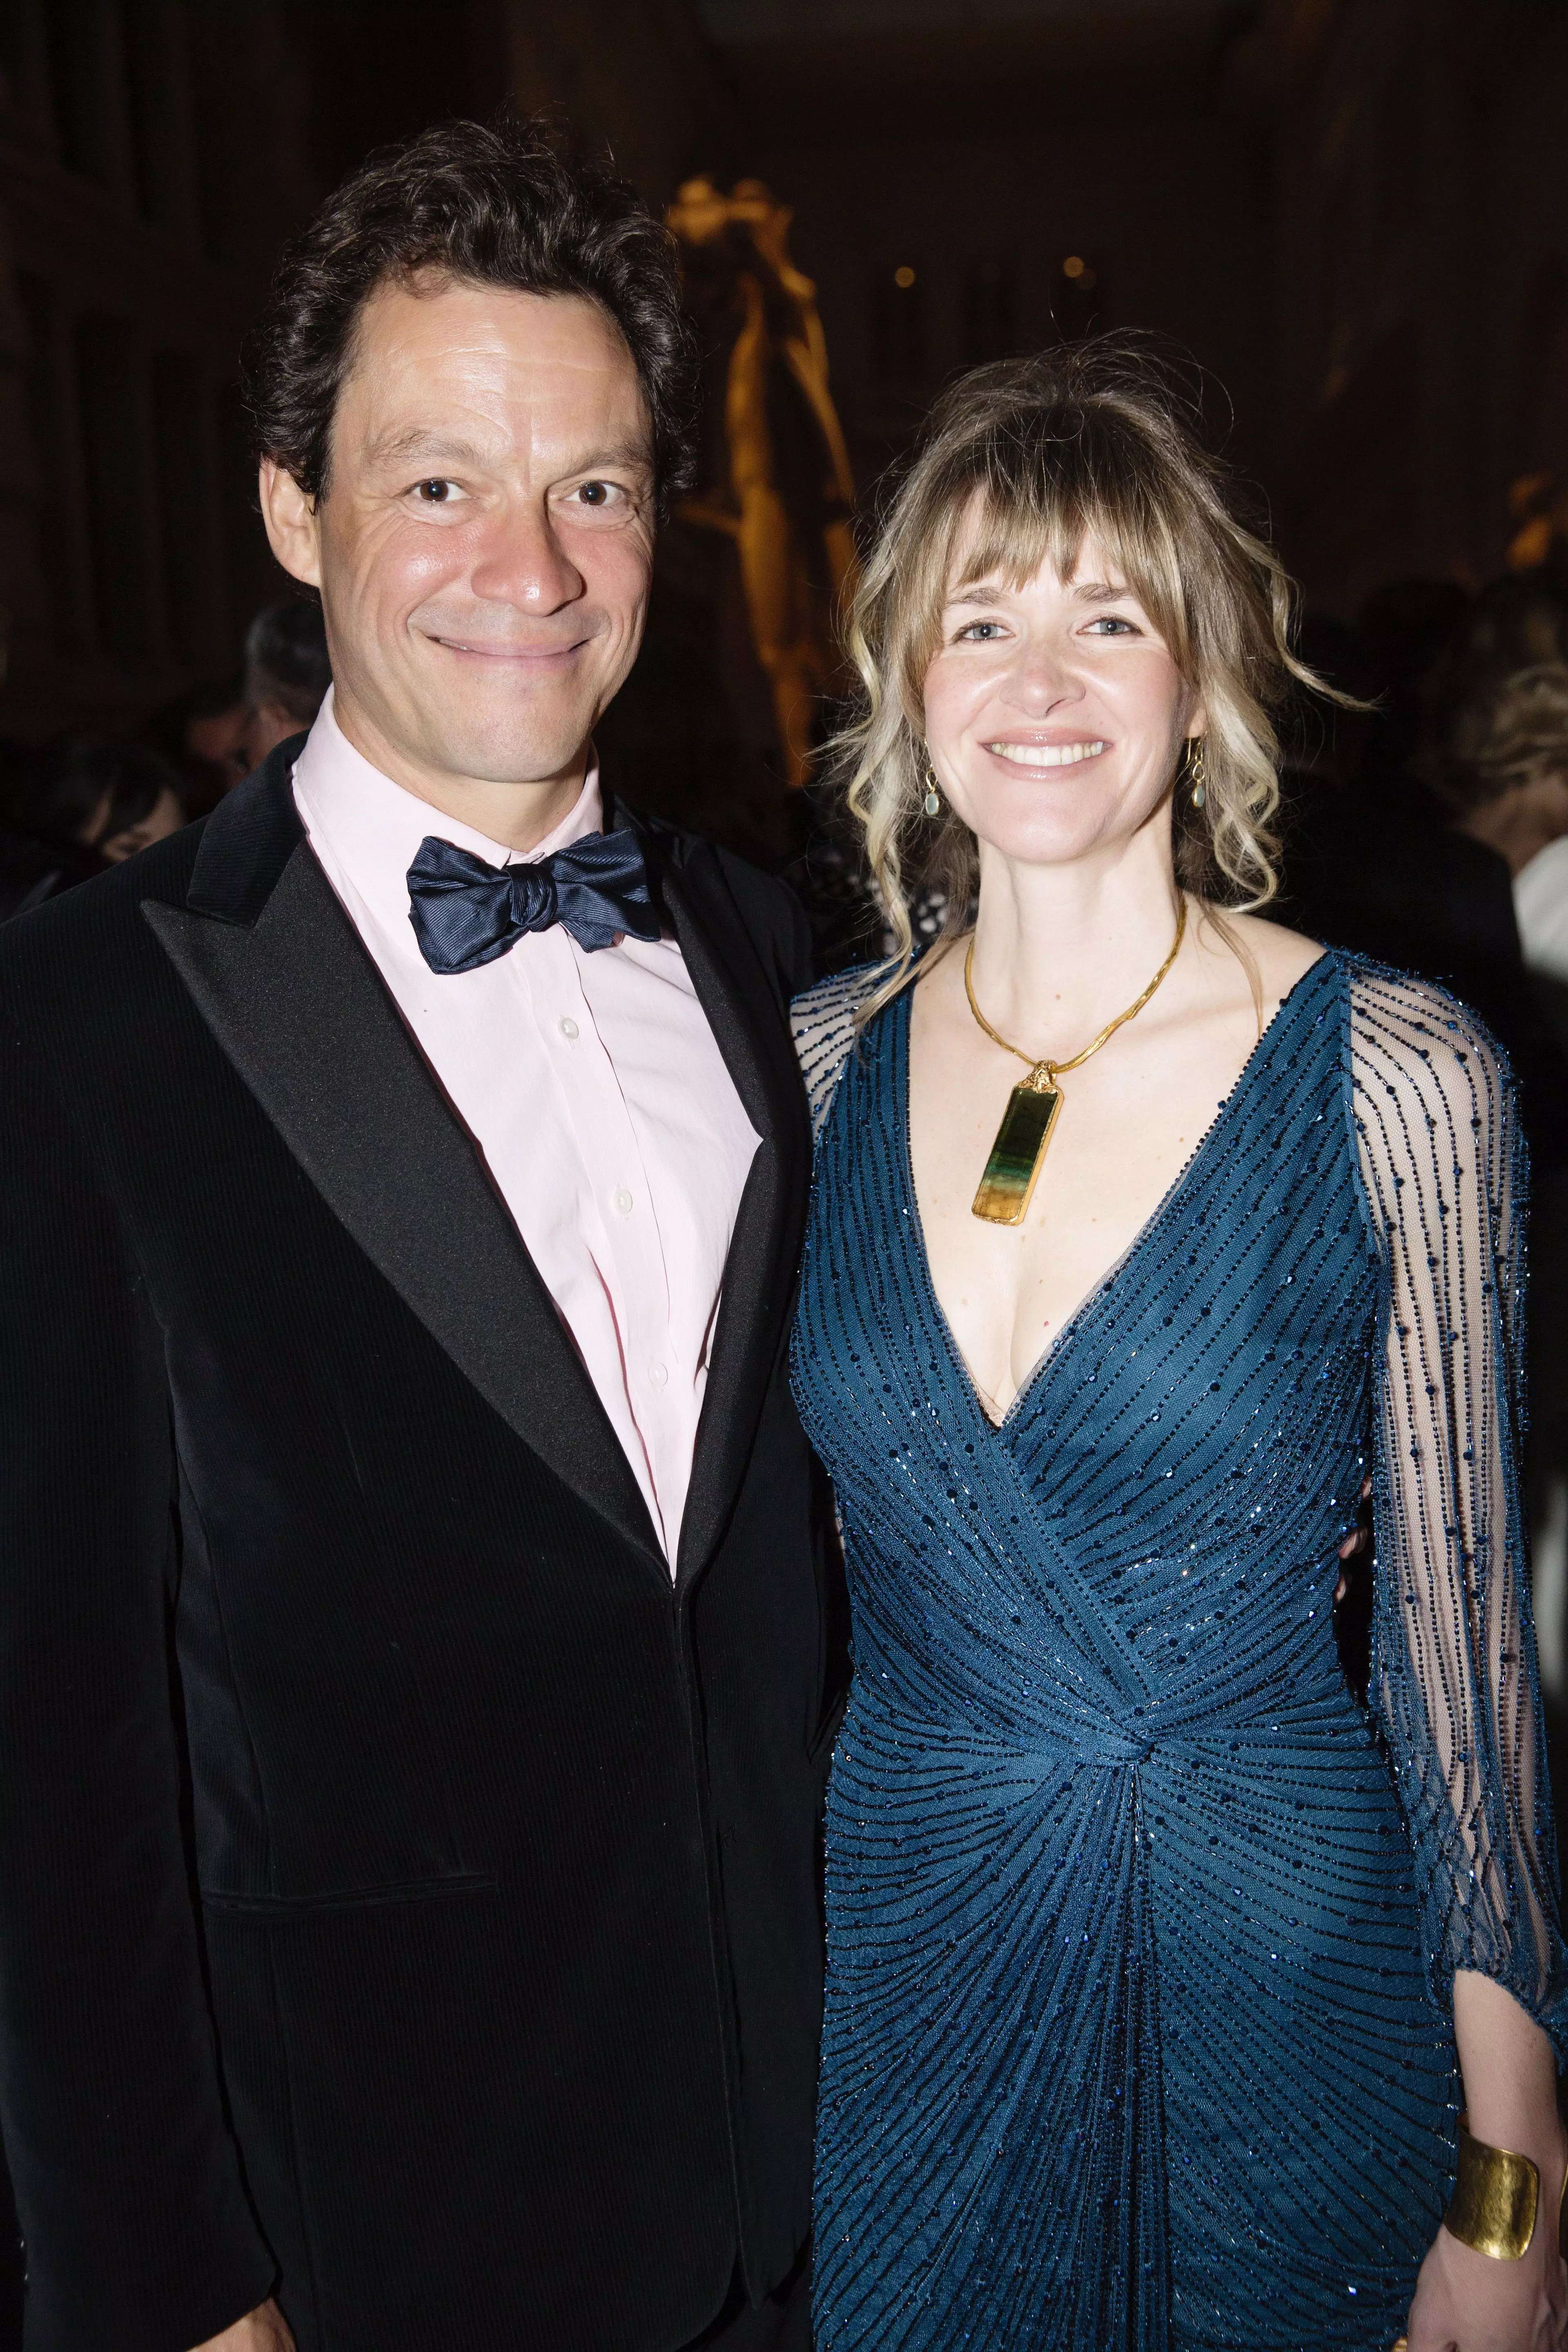 Dominic West has confirmed him and wife Catherine are 'strong' (